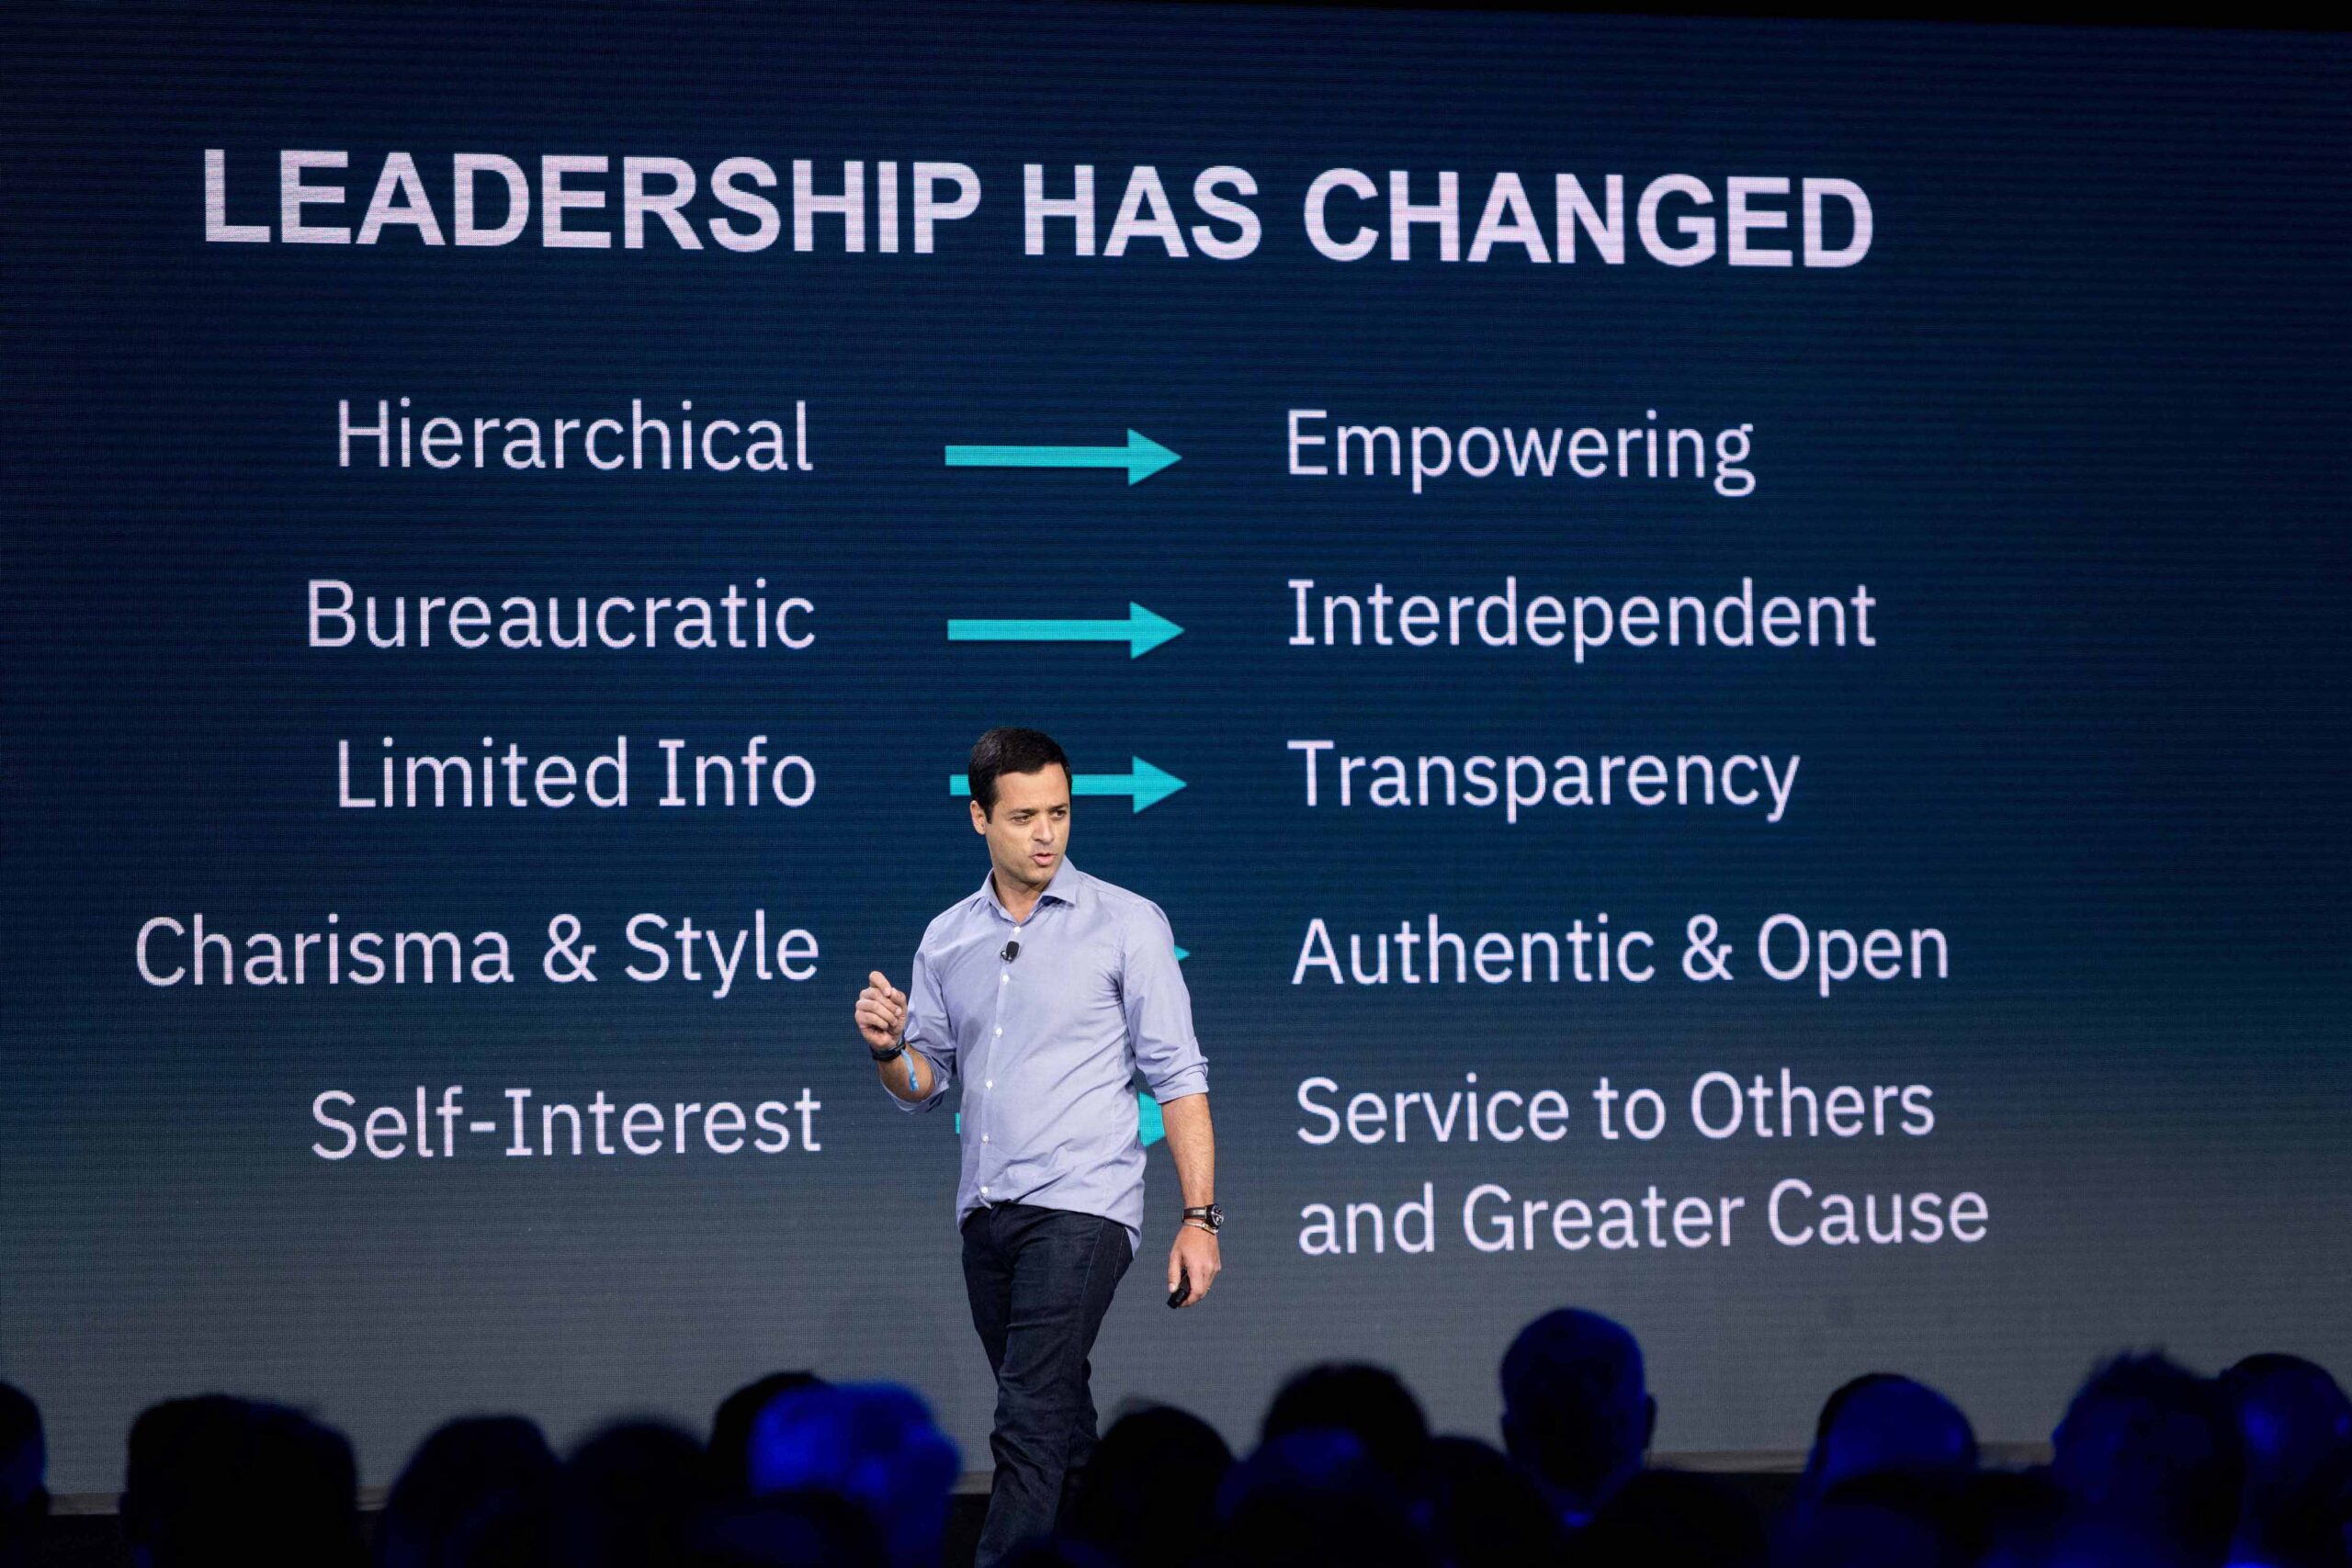 "Leadership has changed" is displayed in the background as a speaker walks the stage with attendees in the front row. The event photographer is using composition effectively.